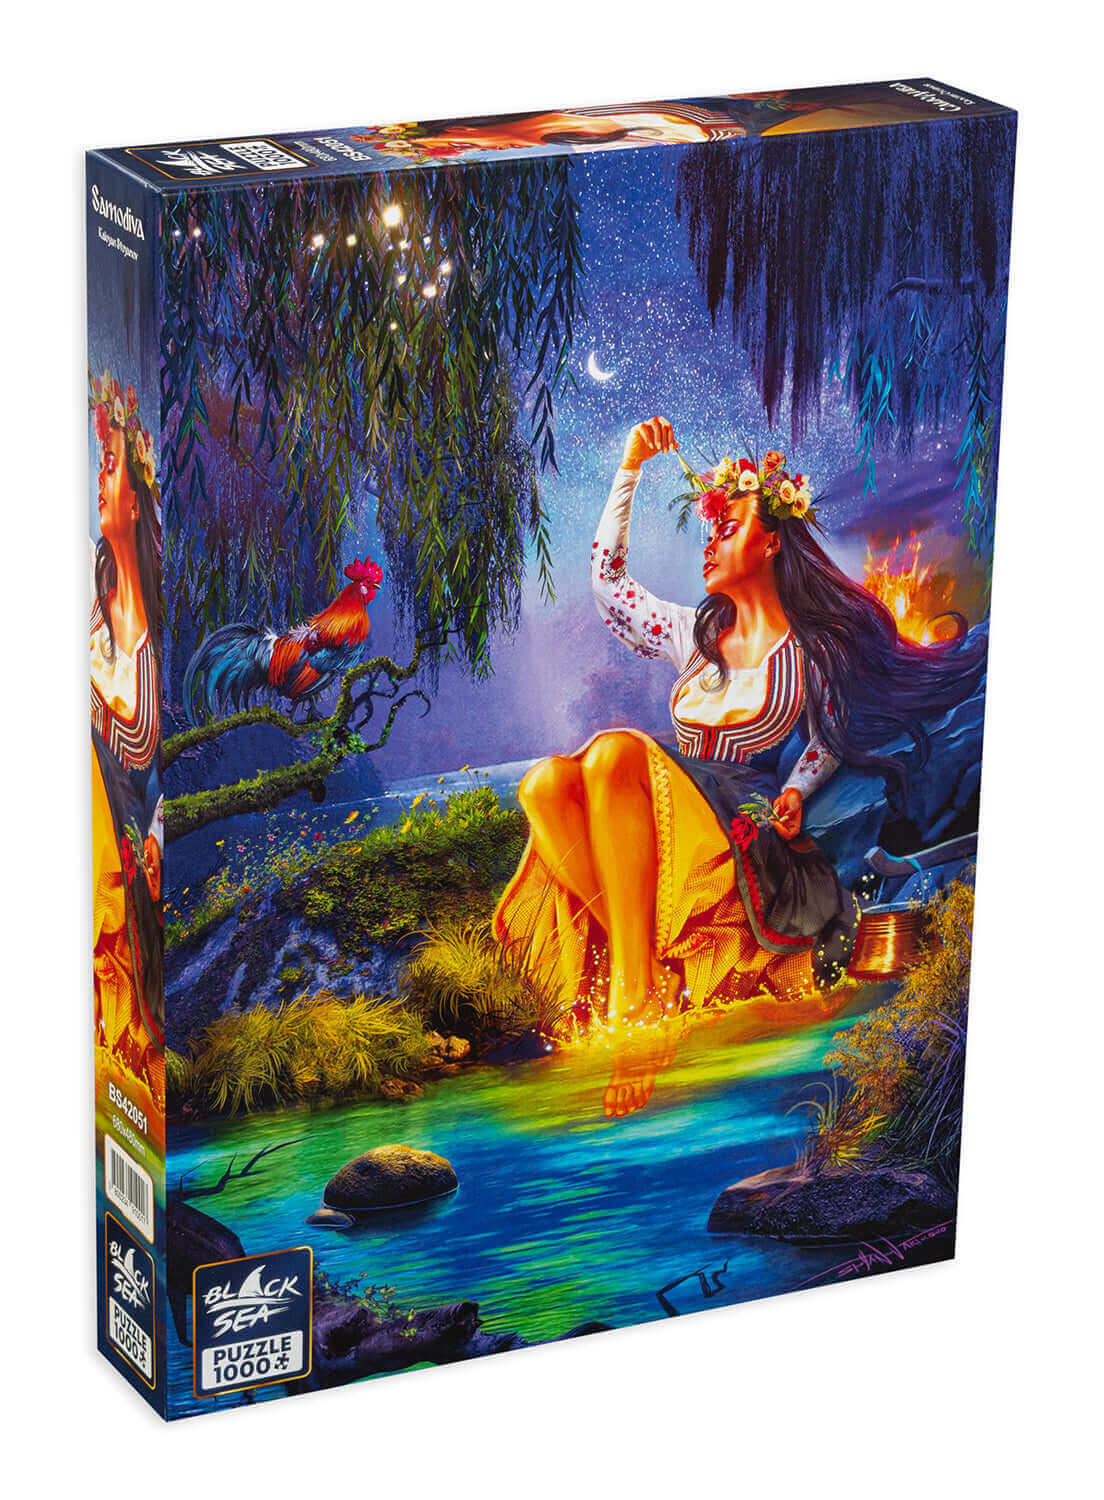 Puzzle Black Sea Premium 1000 pieces - Samodiva, The legend warns: roam not in the gloomy woods after dark, for evil will find you. The rays of the moon will reveal the beauty of the samodiva, the woodland fairy of these lands, unearthly but deadly. O how